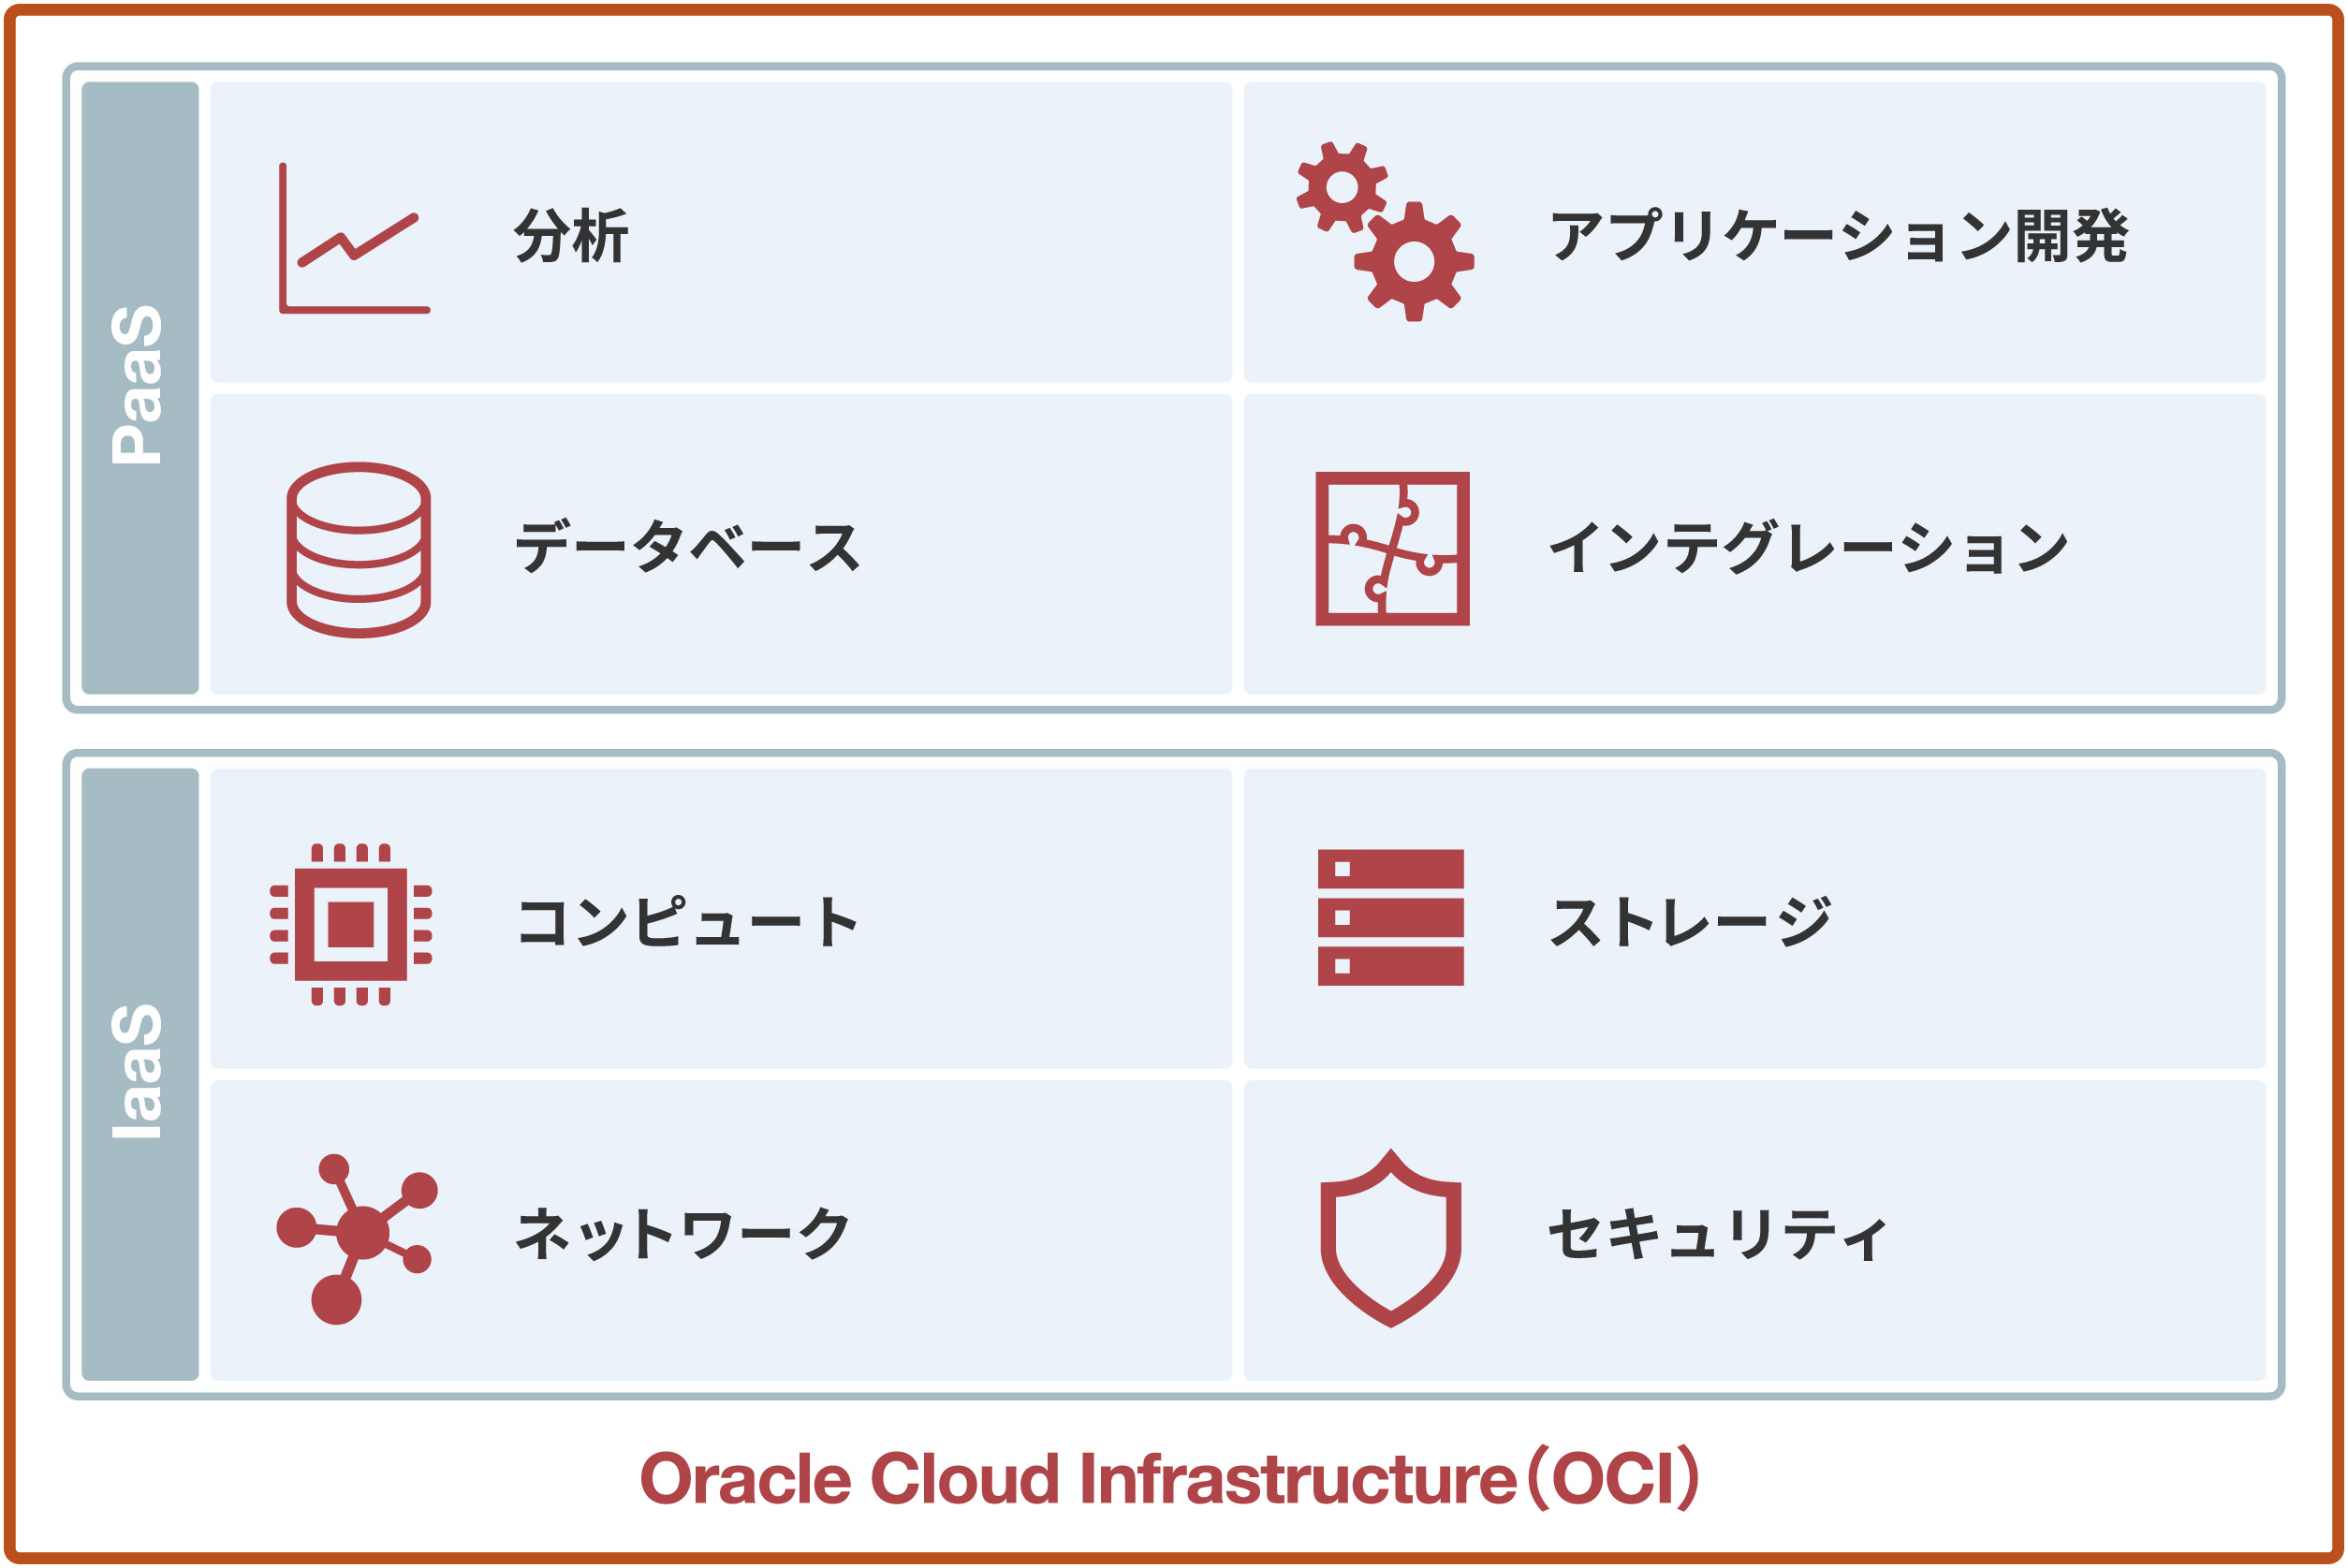 Oracle Cloud Infrastructureとは？